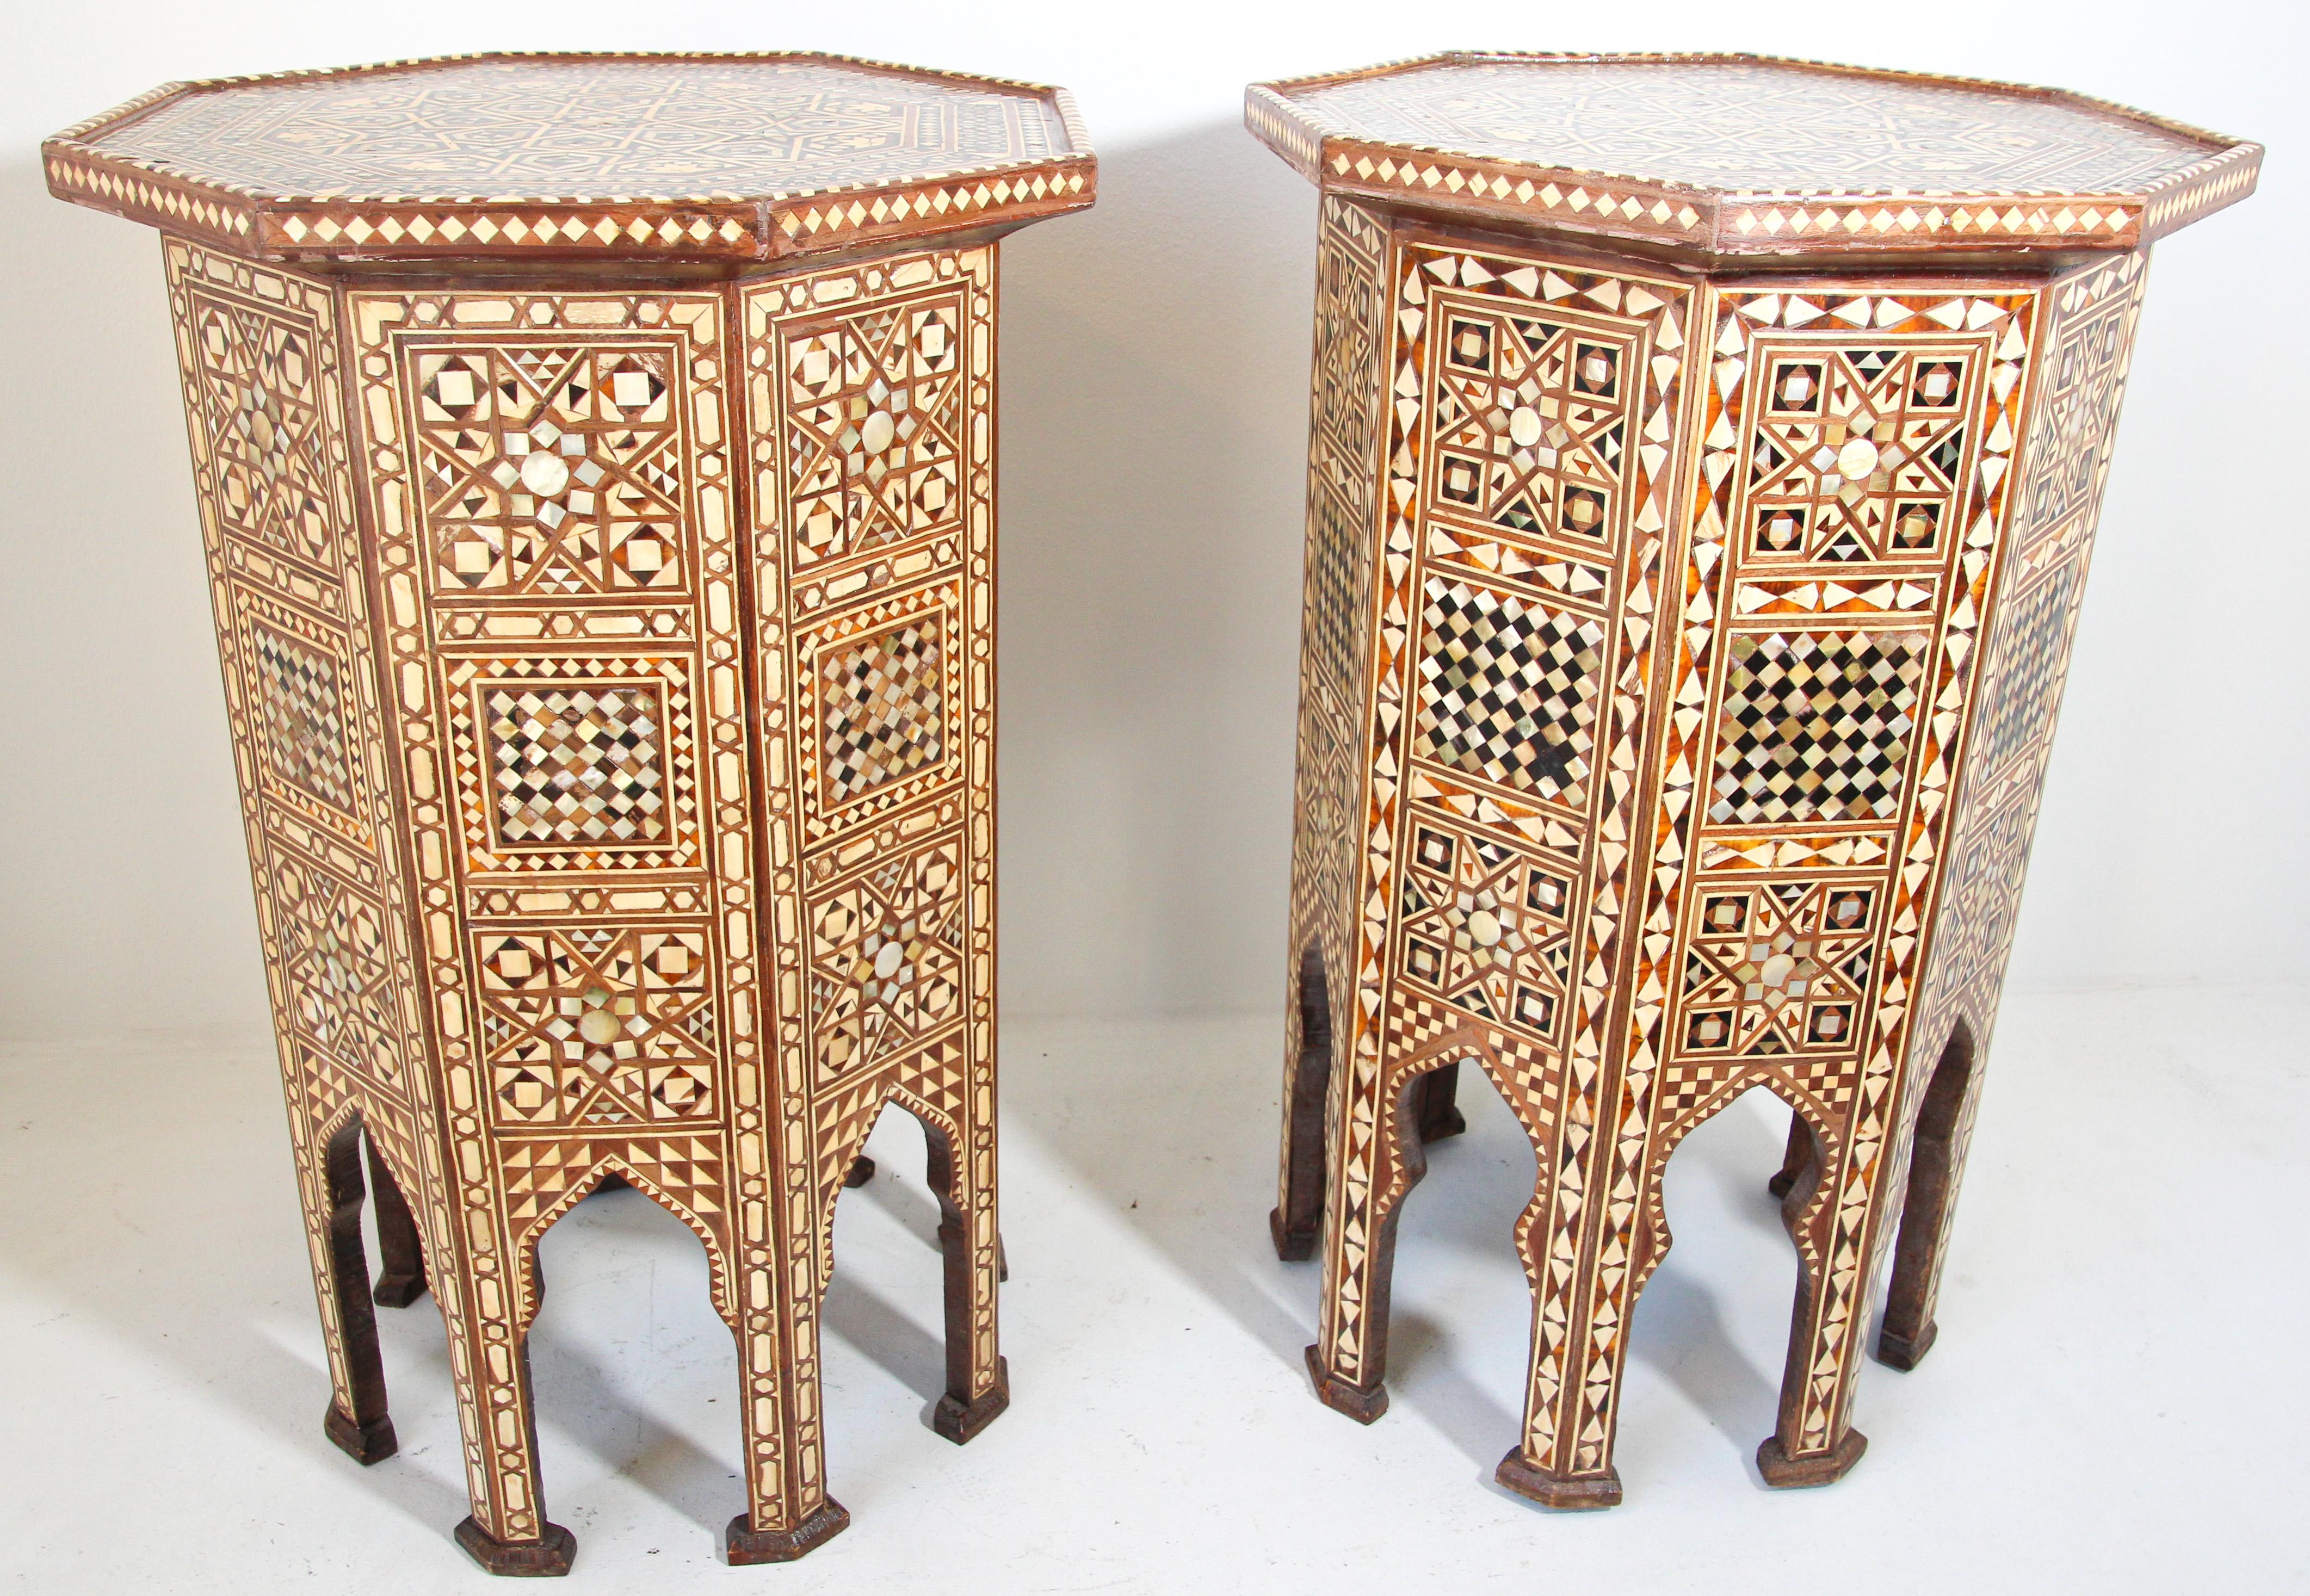 Moorish Moroccan Octagonal Pedestal Tables Inlaid with Mosaic Marquetry For Sale 2